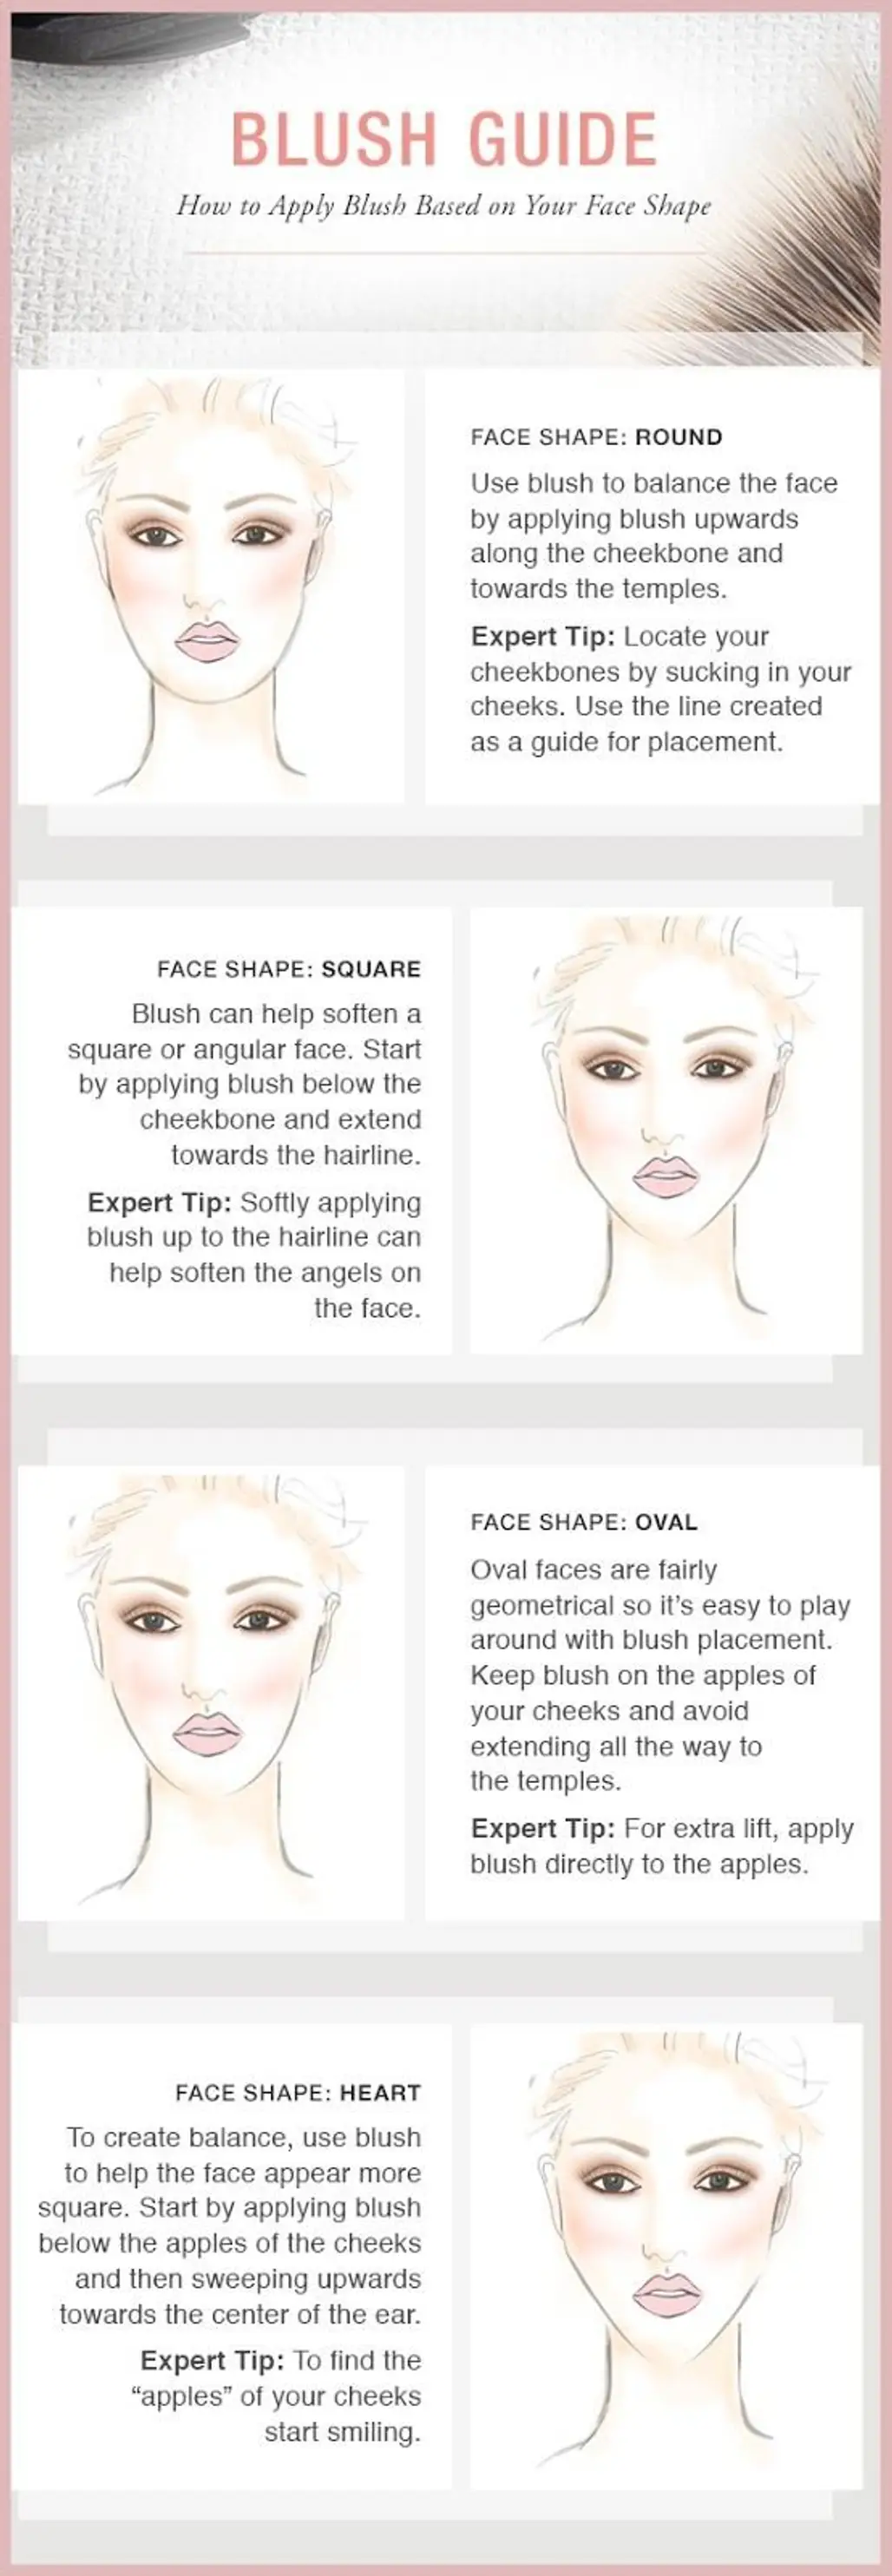 How to Apply Blush for Your Face Shape